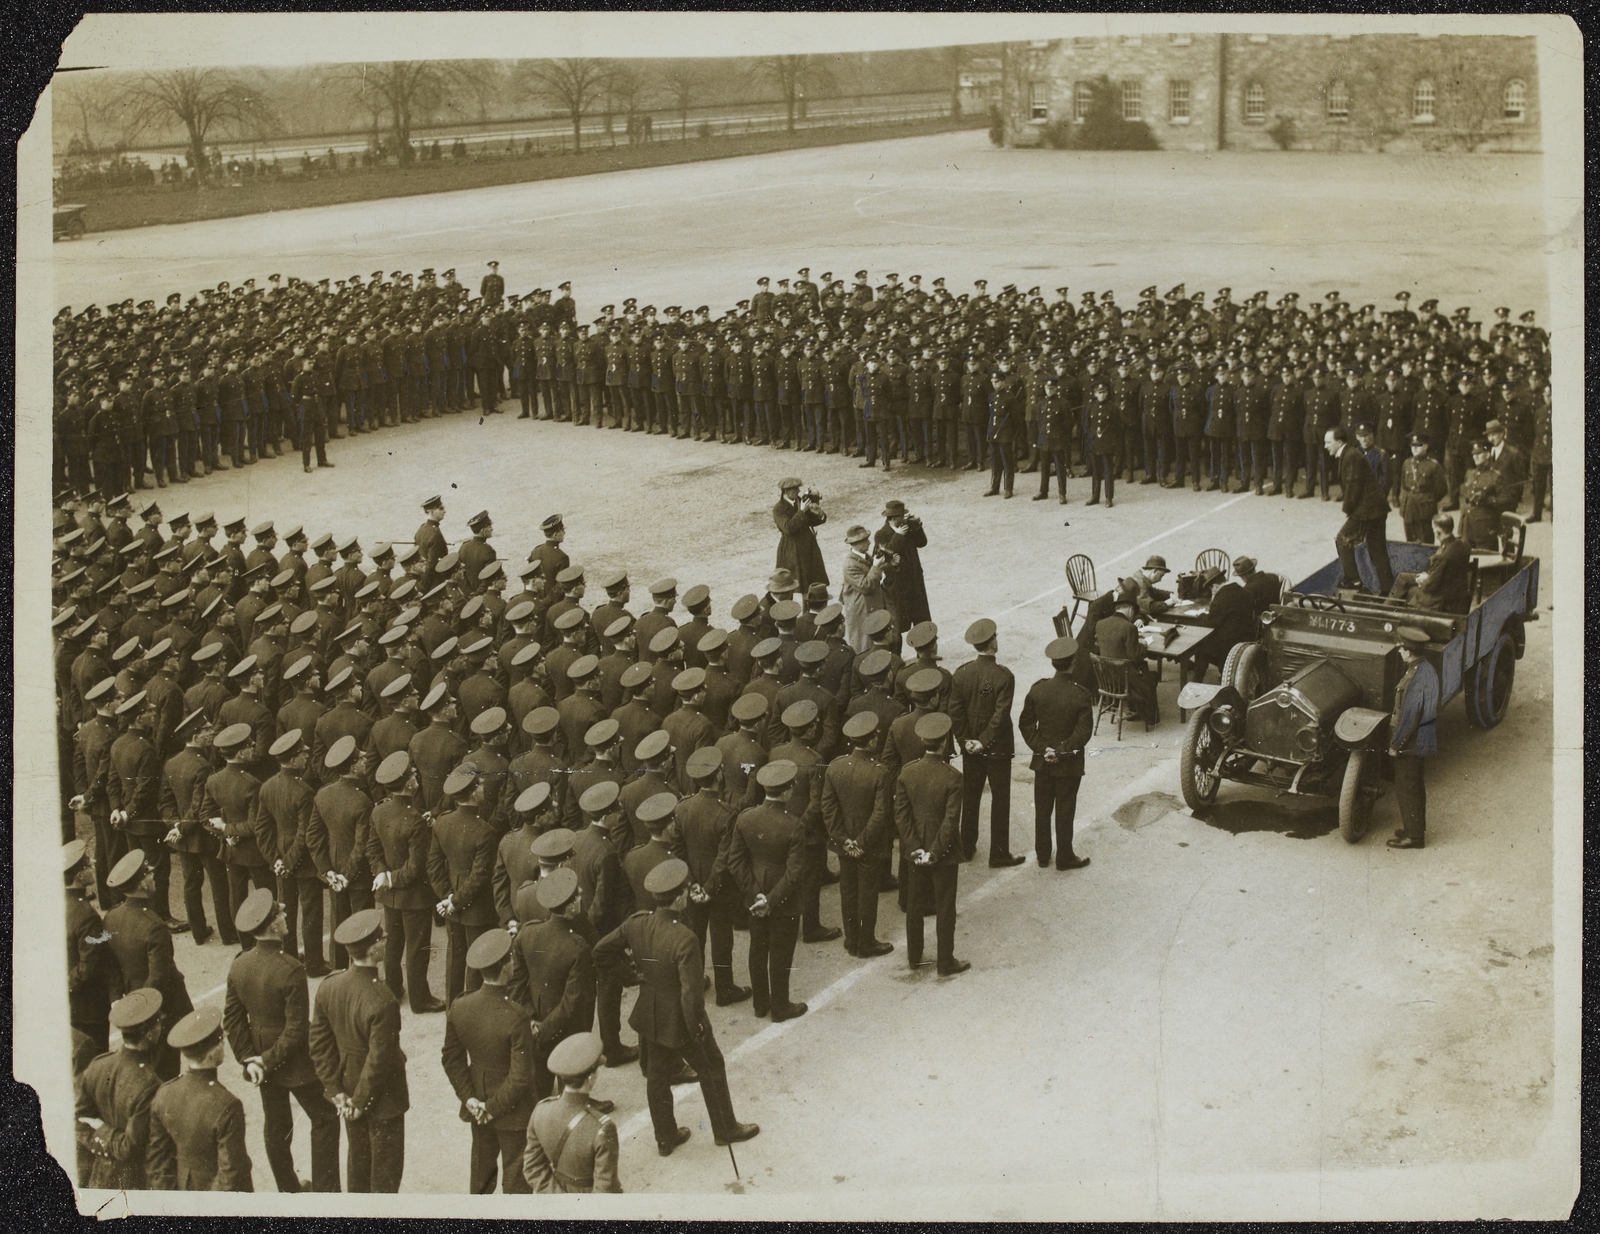 Image - Kevin O'Higgins addresses the same gathering. This viewpoint gives some idea of the scale of the deployment of the new force across the country. Image: National Library of Ireland